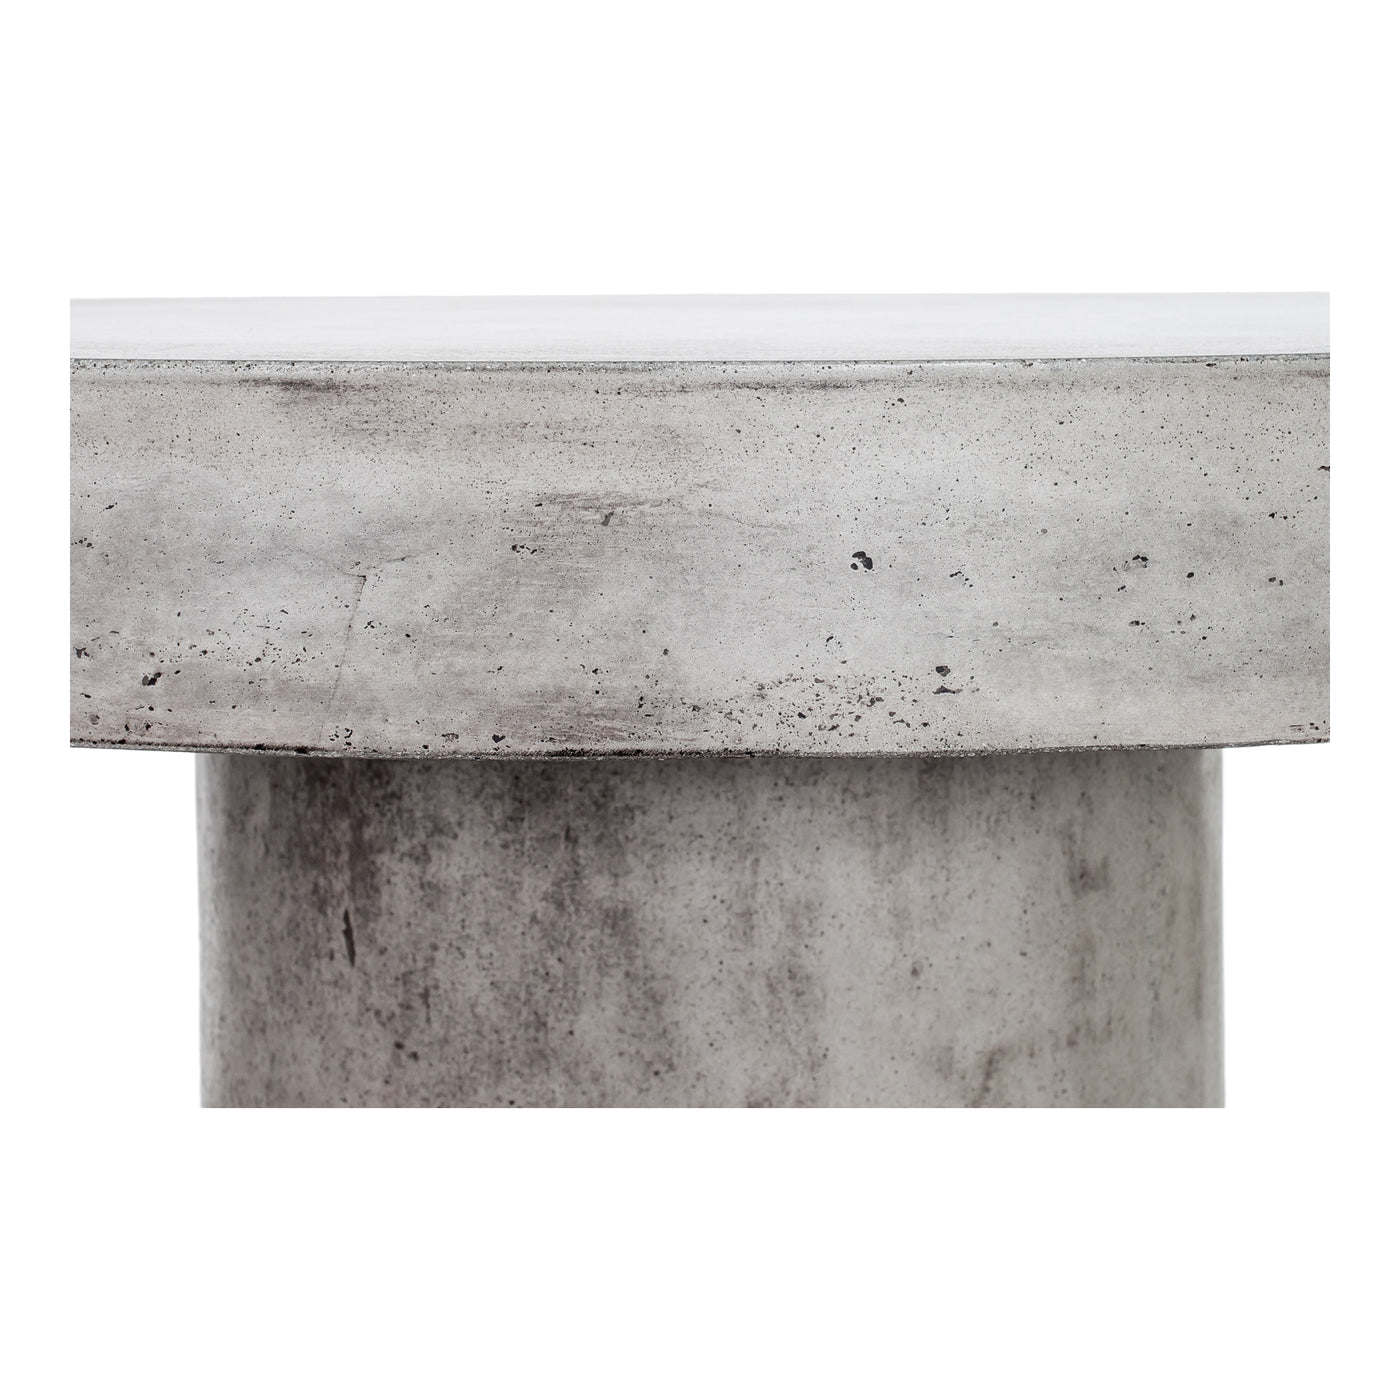 Keen on concrete to bring the outdoors a little closer. A hard material for softer contrast, the Cassius outdoor patio tab...